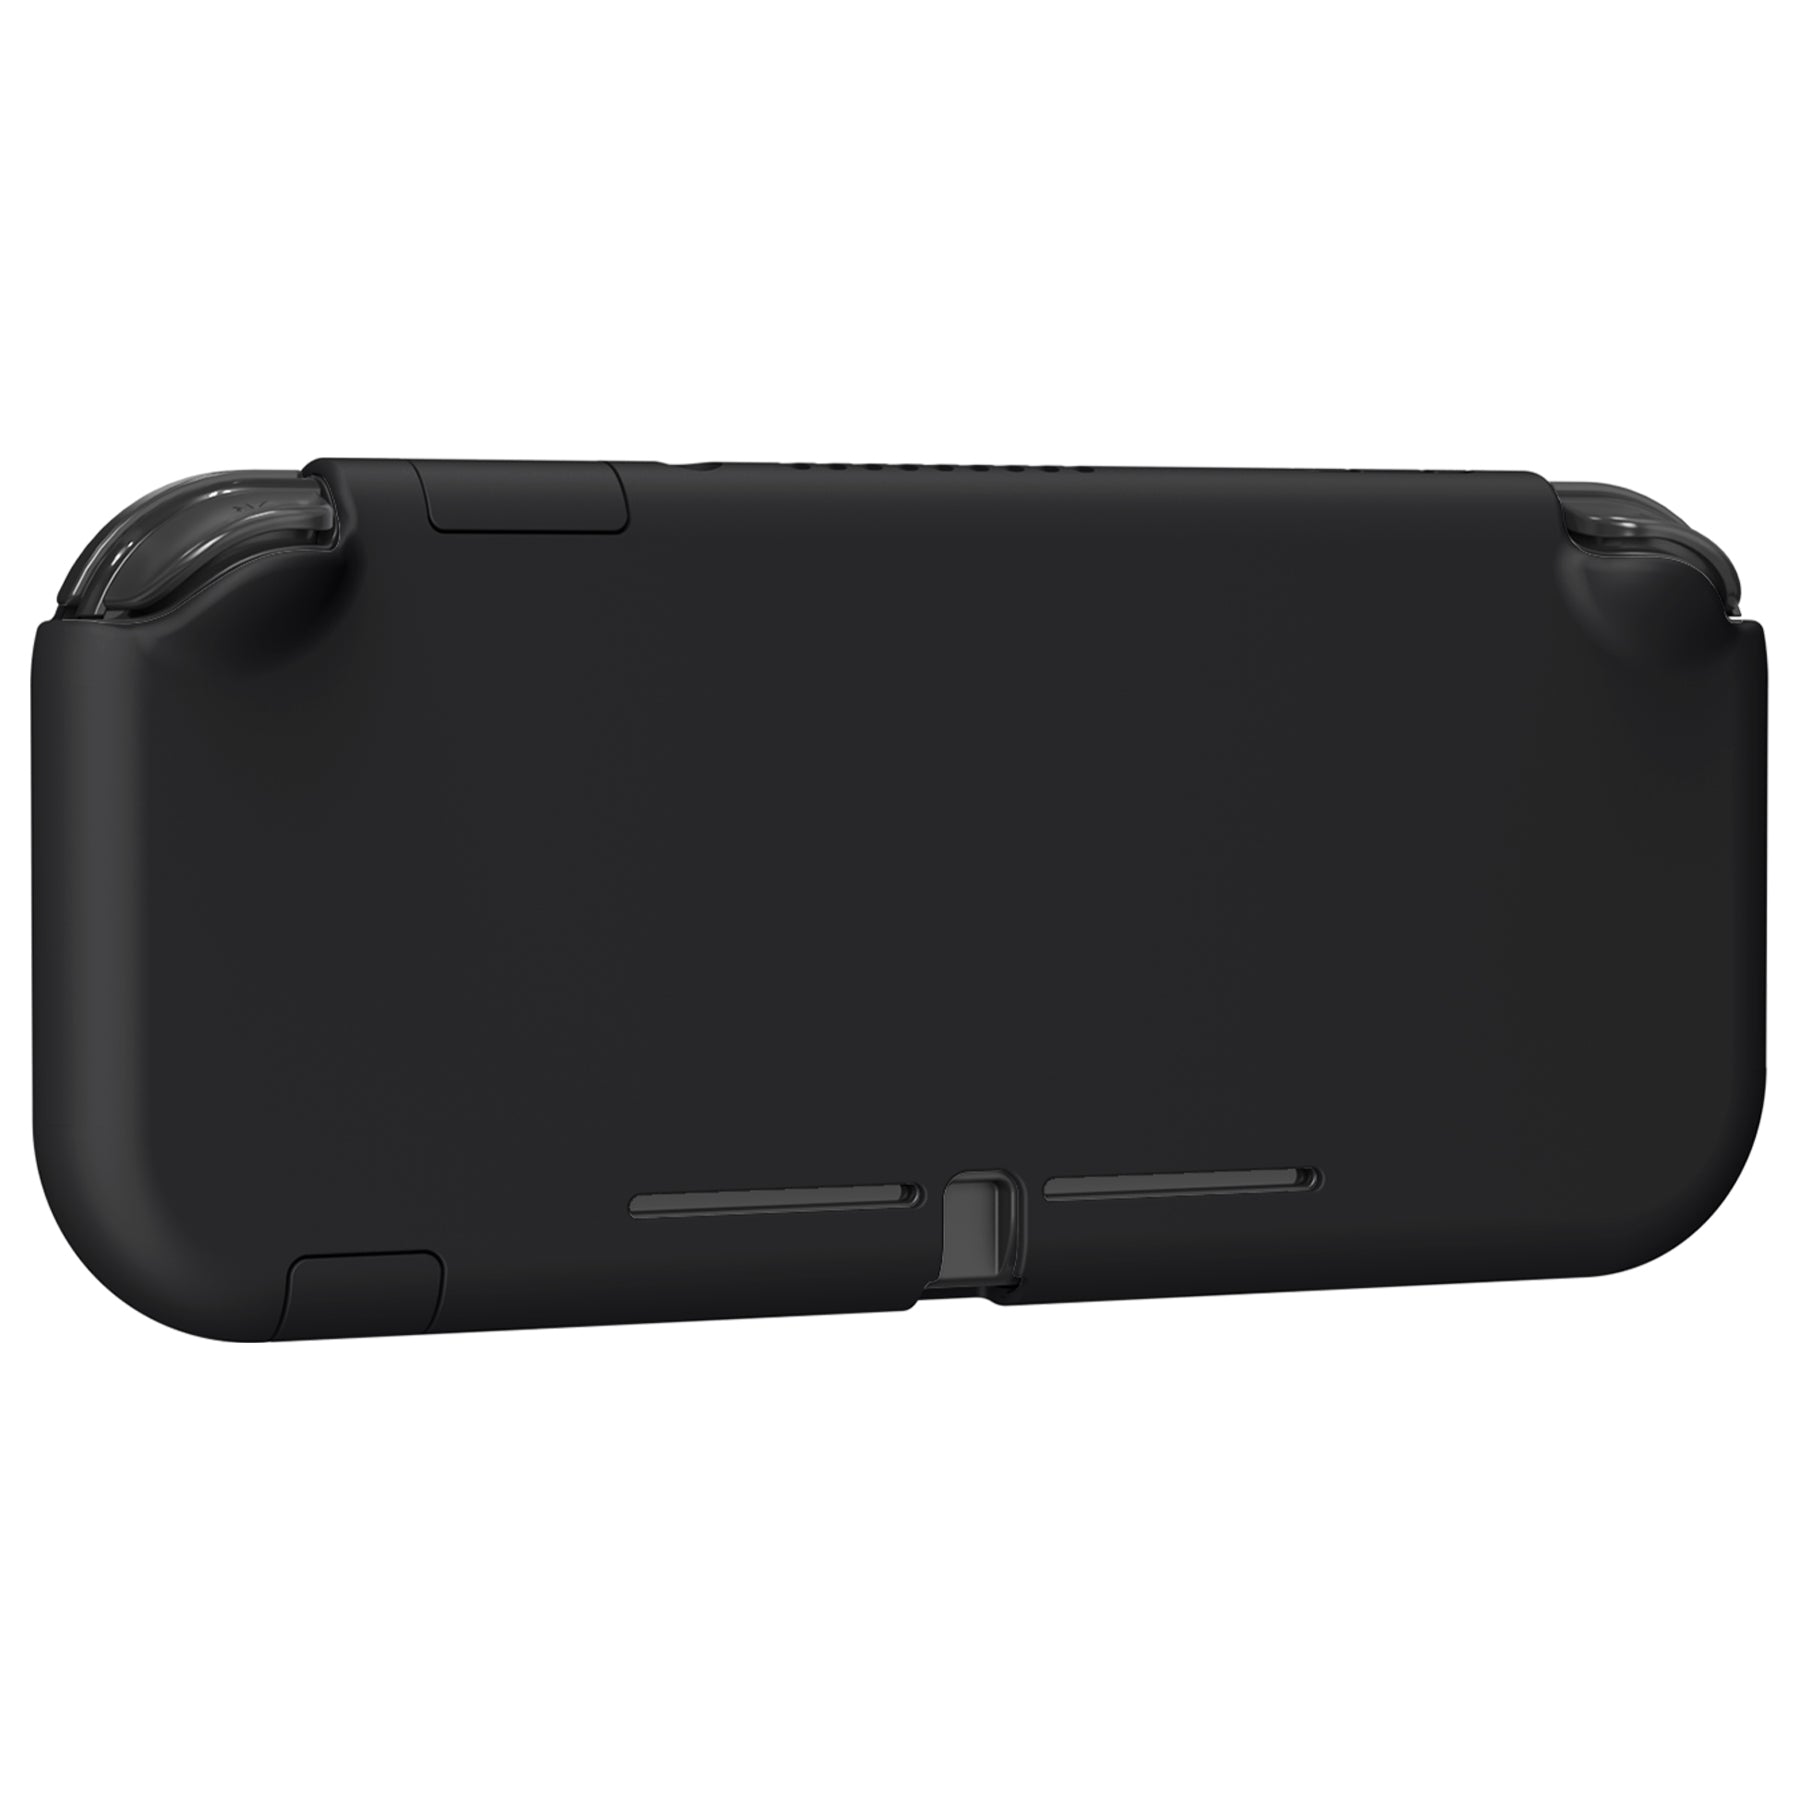 PlayVital Black Protective Case for NS Switch Lite, Hard Cover Protector for NS Switch Lite - 1 x Black Border Tempered Glass Screen Protector Included - YYNLP006 PlayVital